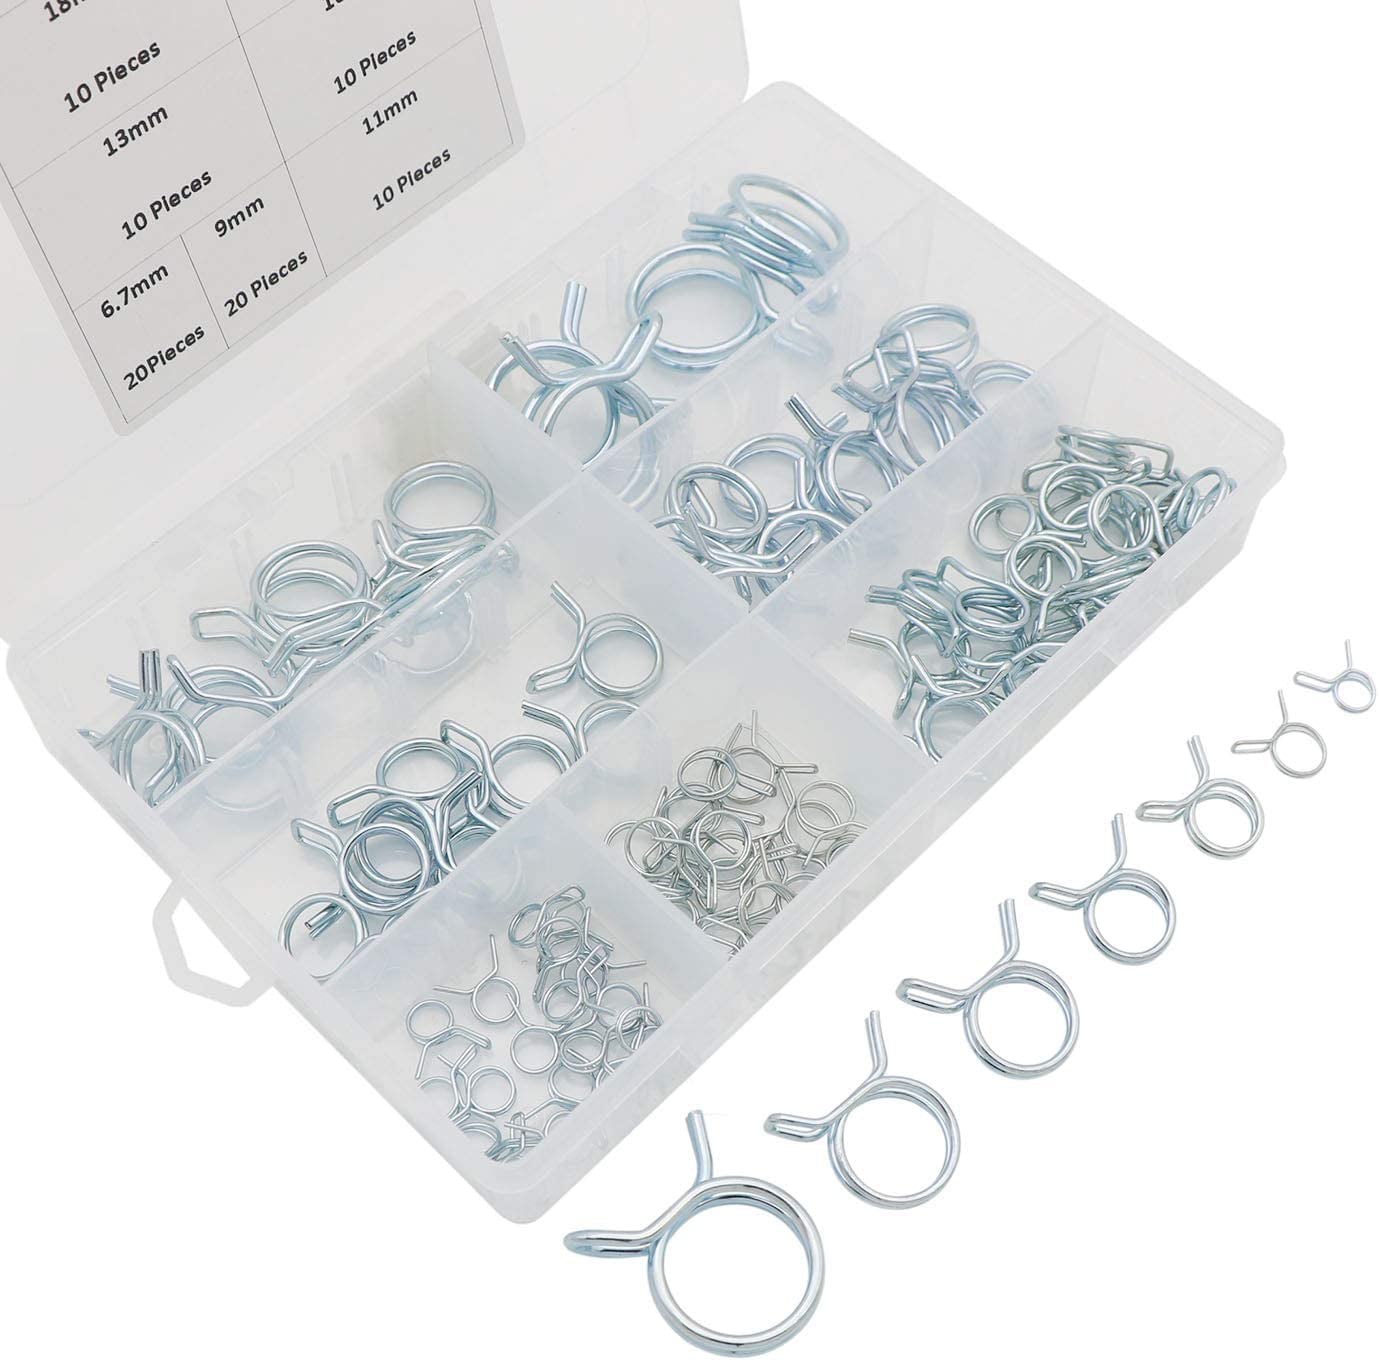 7 Size 6.7/9/11/13/16/18mm 85 Pcs Double Wire Fuel Line Hose Tubing Spring Clips Clamp Assortment Kit for Motorcycle ATV 